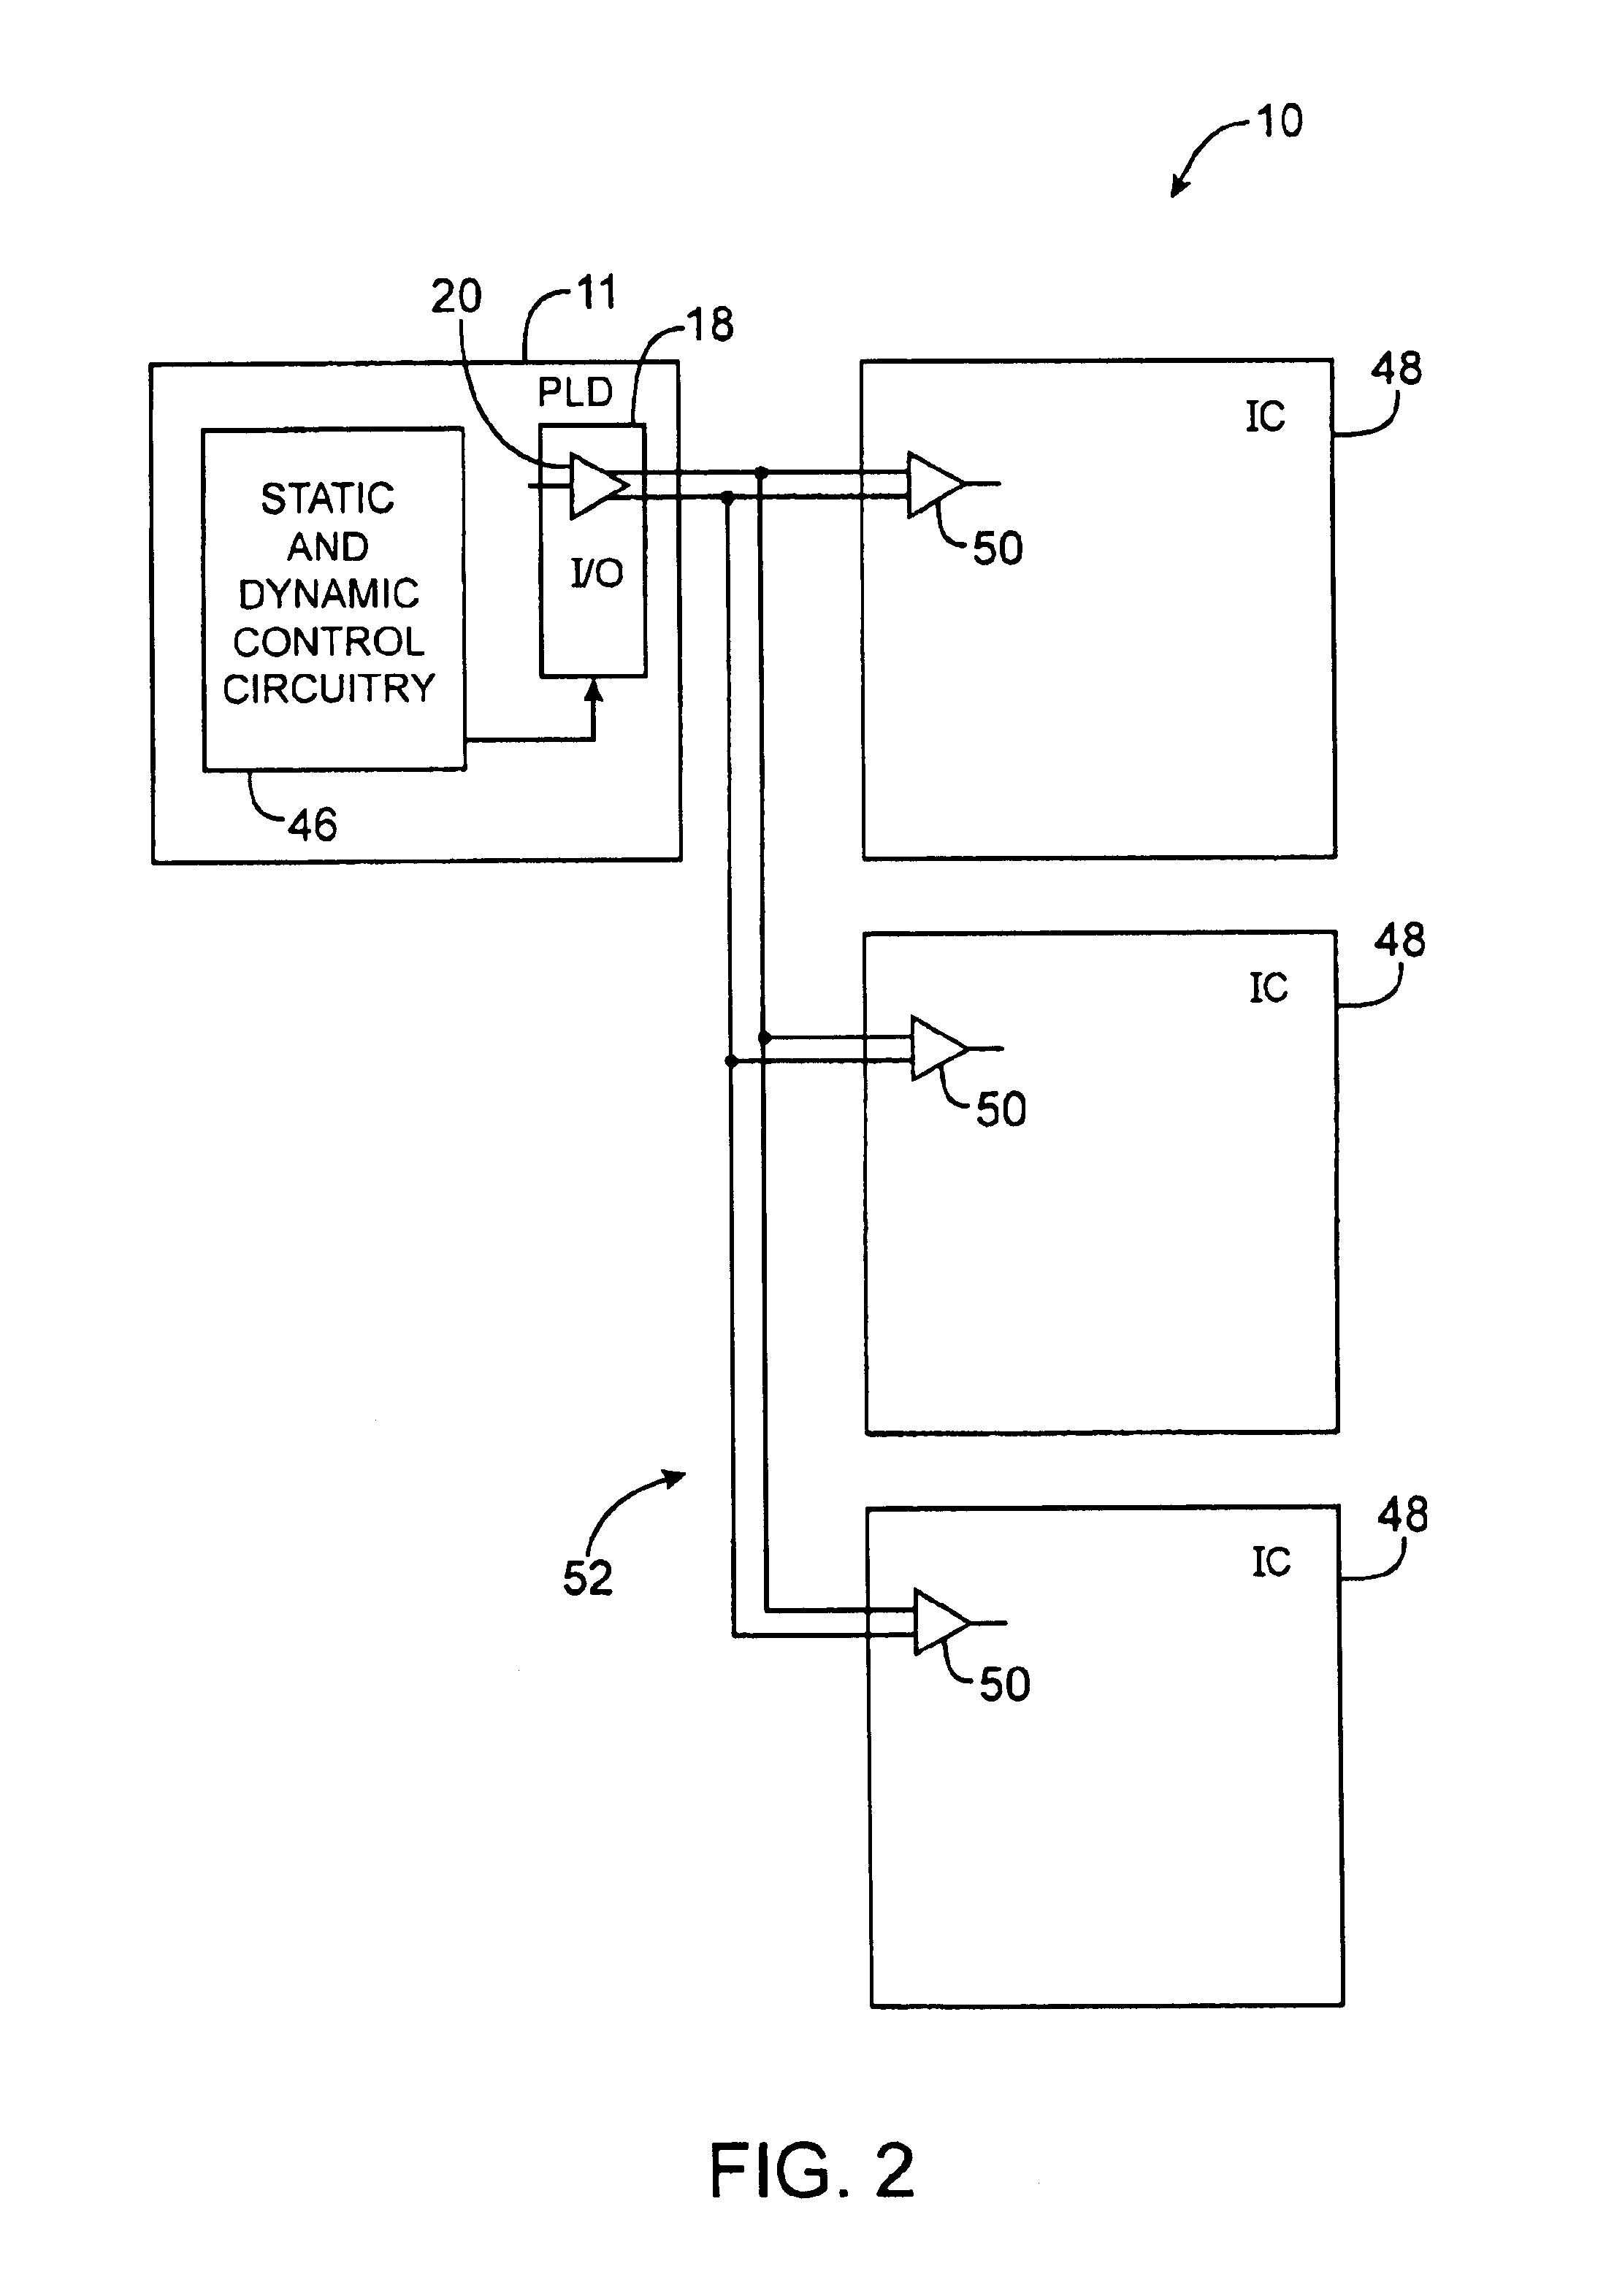 Adjustable differential input and output drivers